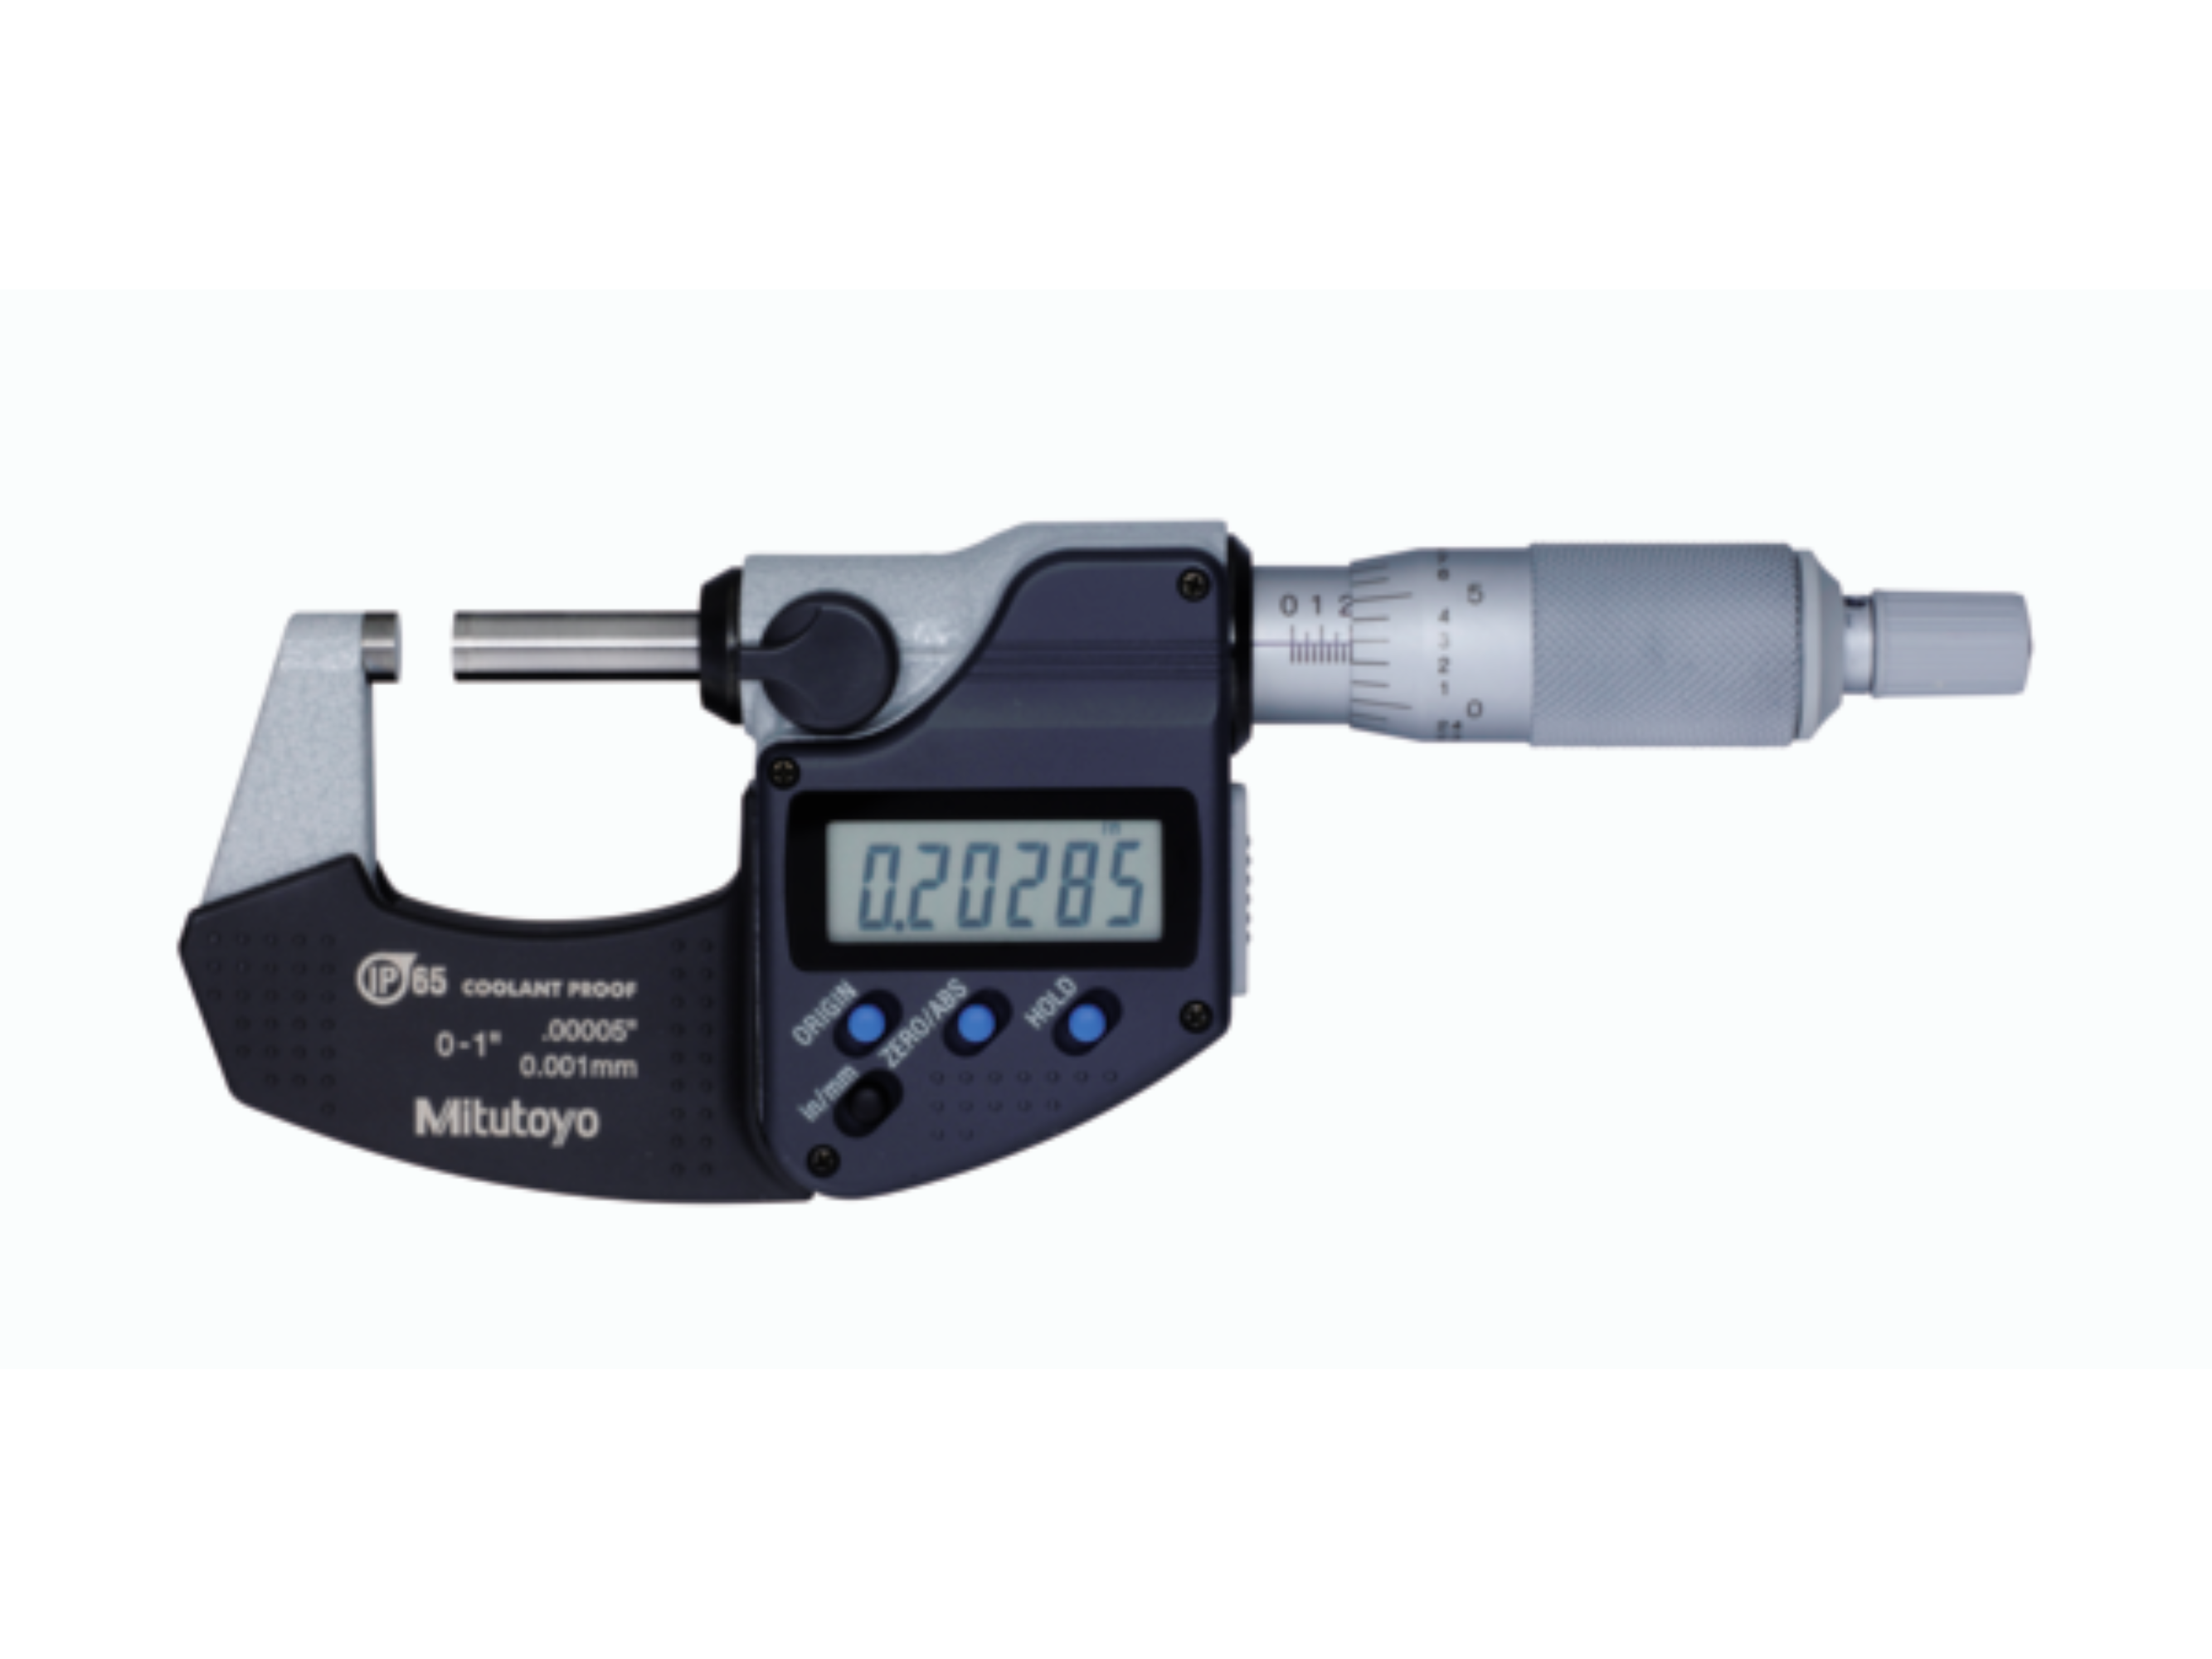 Digimatic Micrometer 50-75mm (2-3"), IP65, Ratchet Stop, With Output 293-332-30